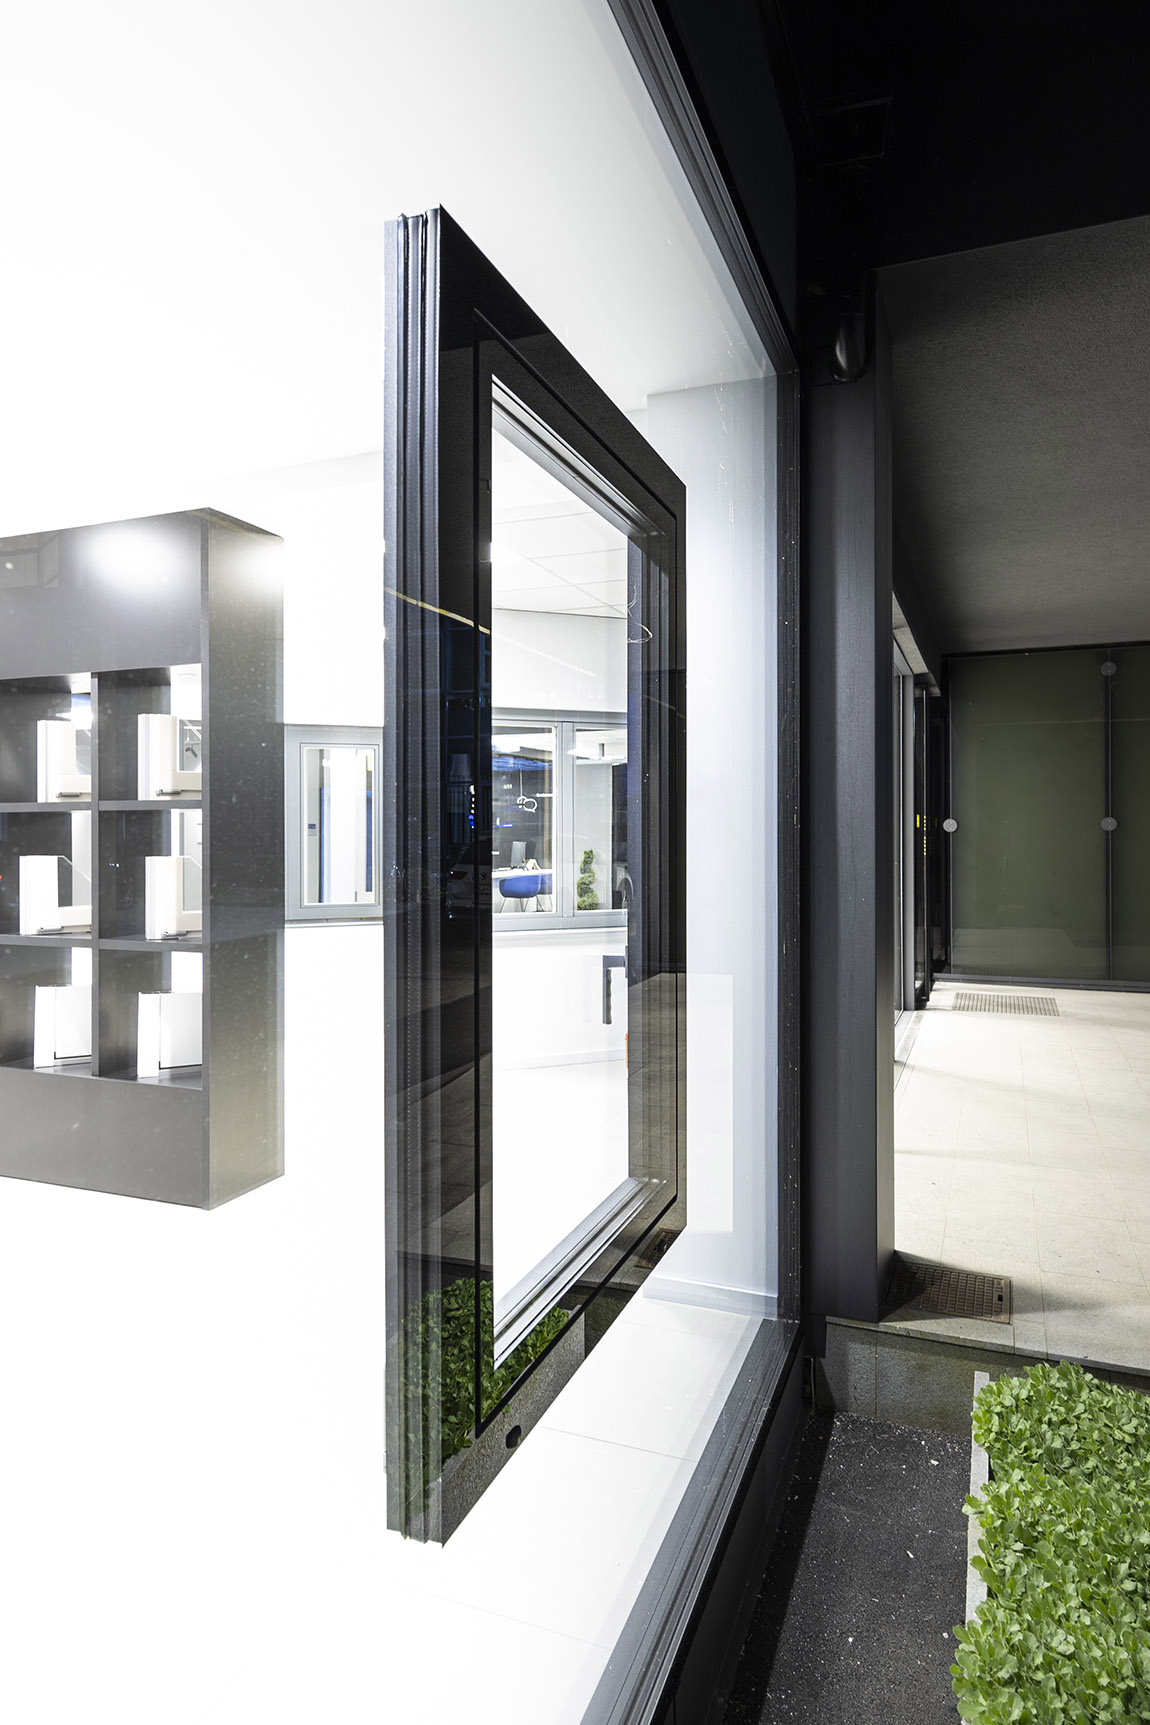 AJM: Floating windows…? Introducing unique innovations in window design